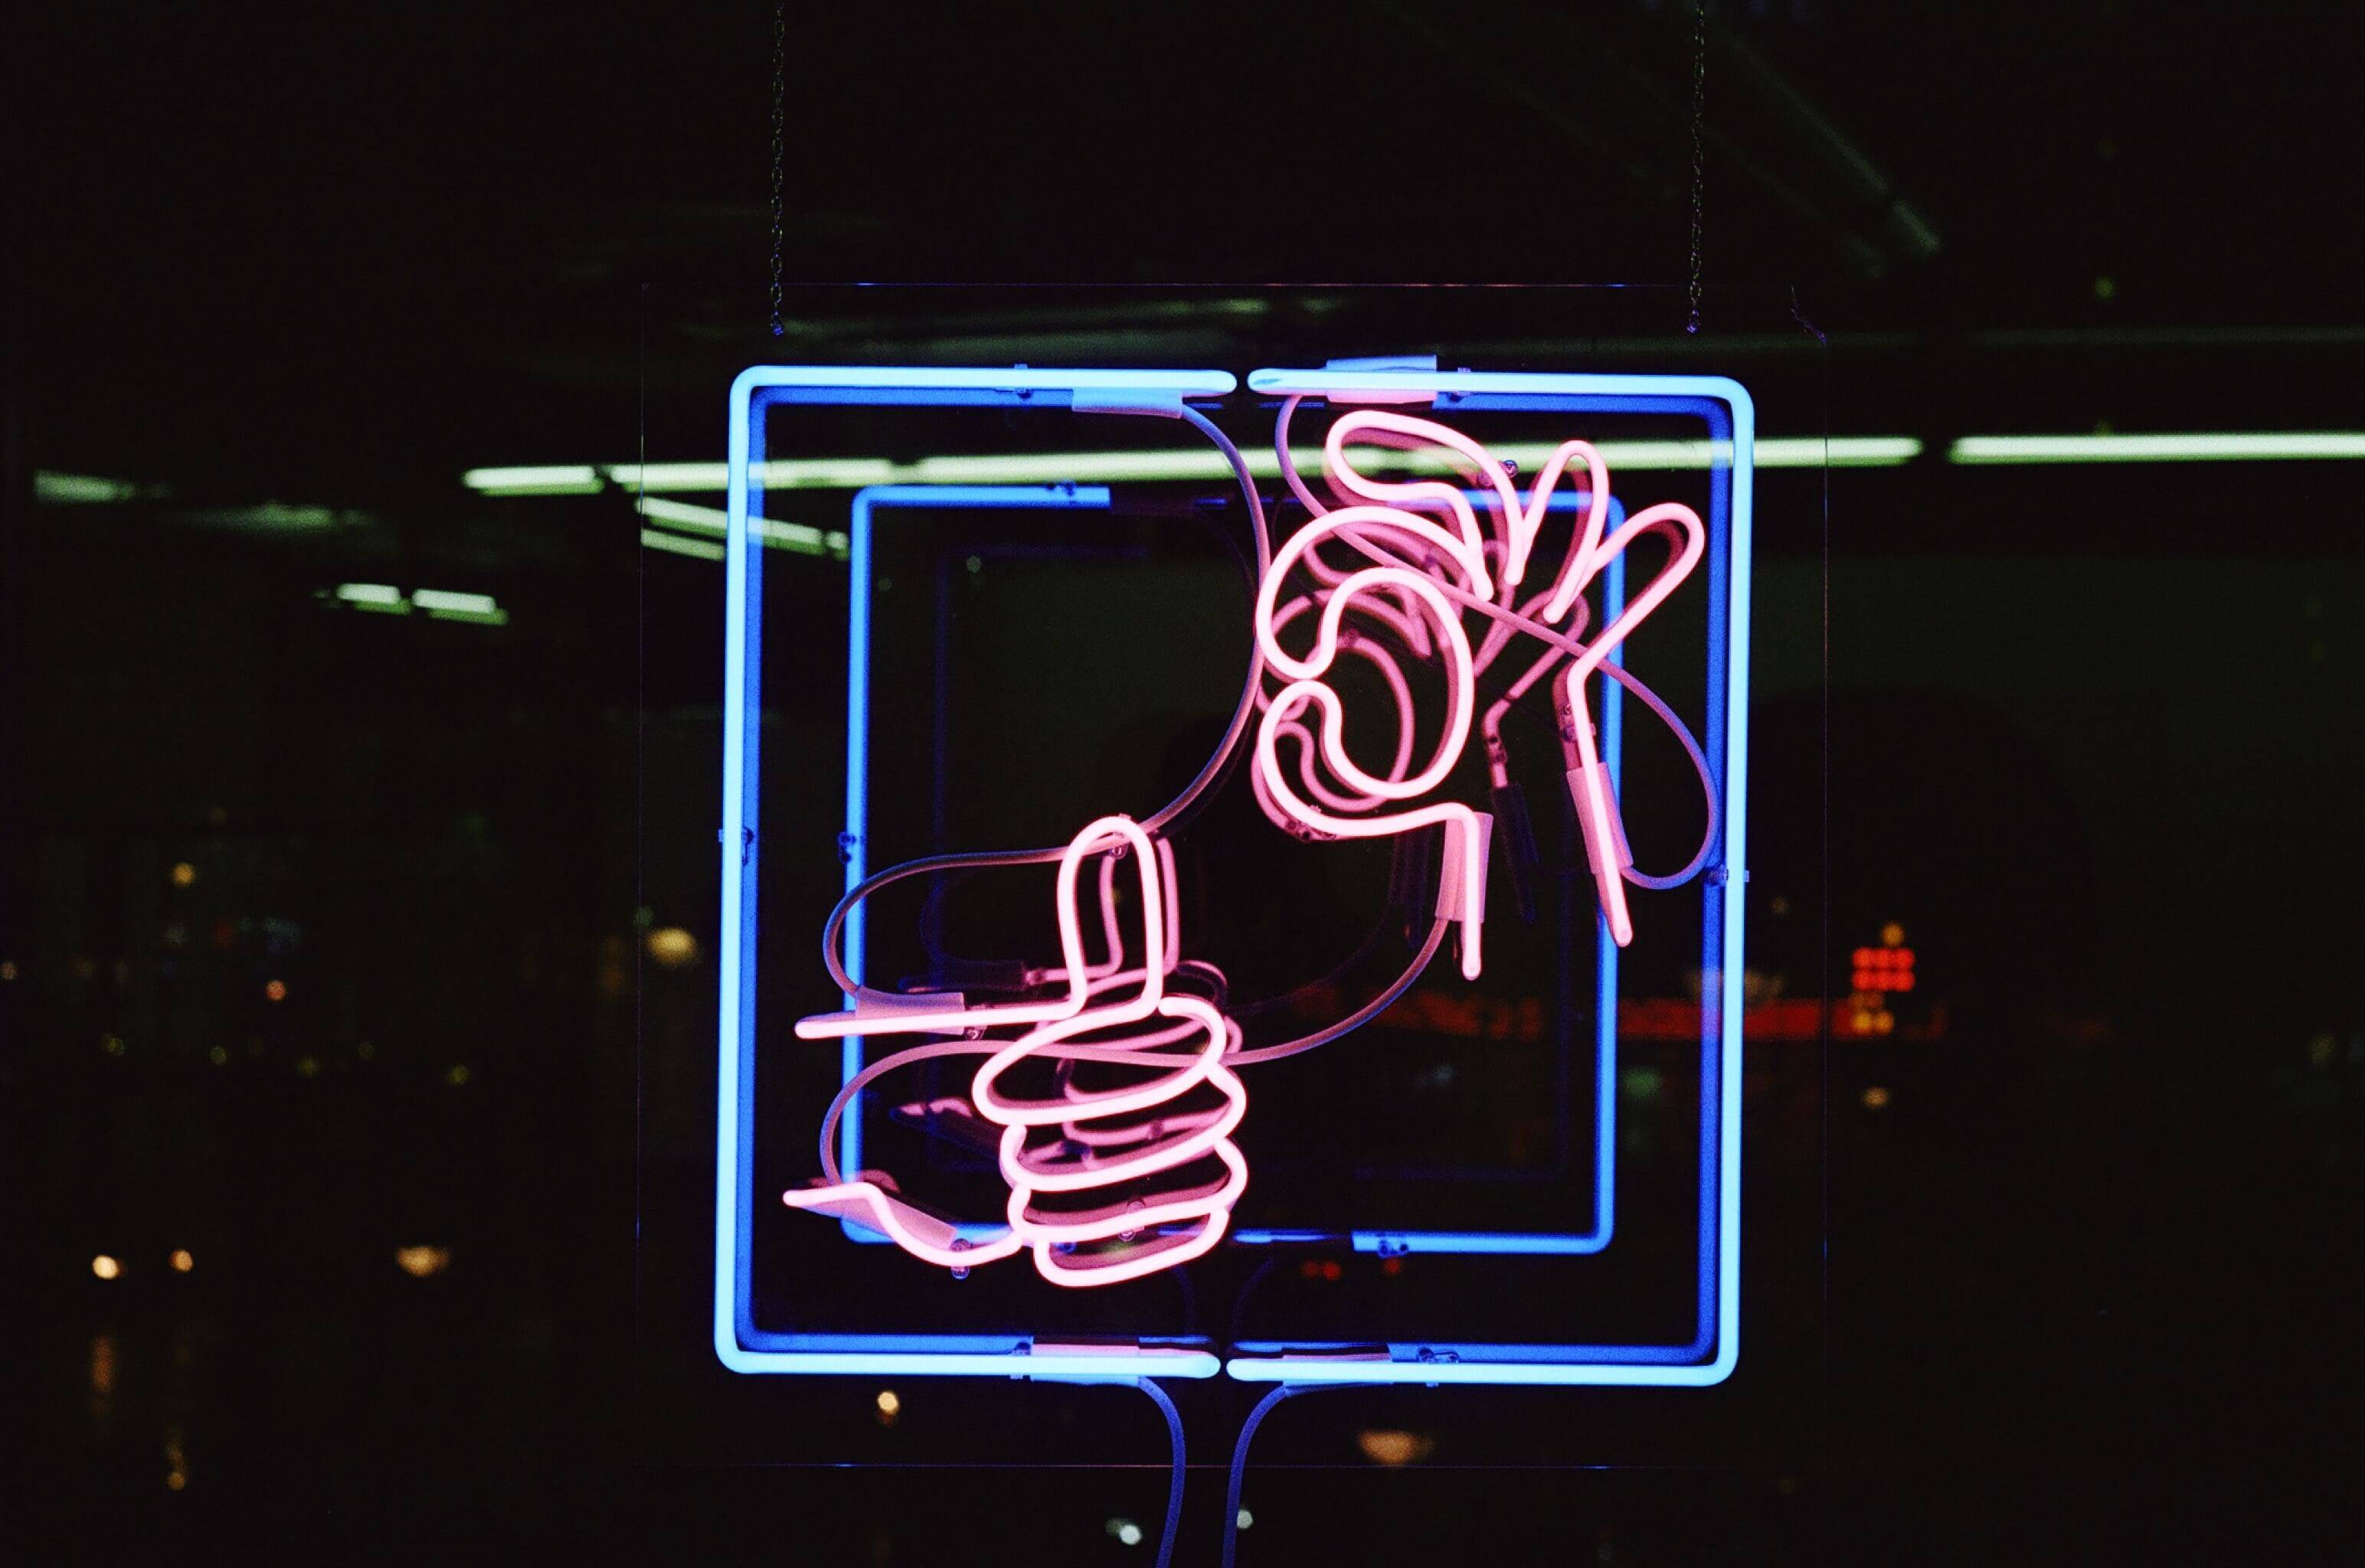 A neon sign showing a thumbs up and an OK sign